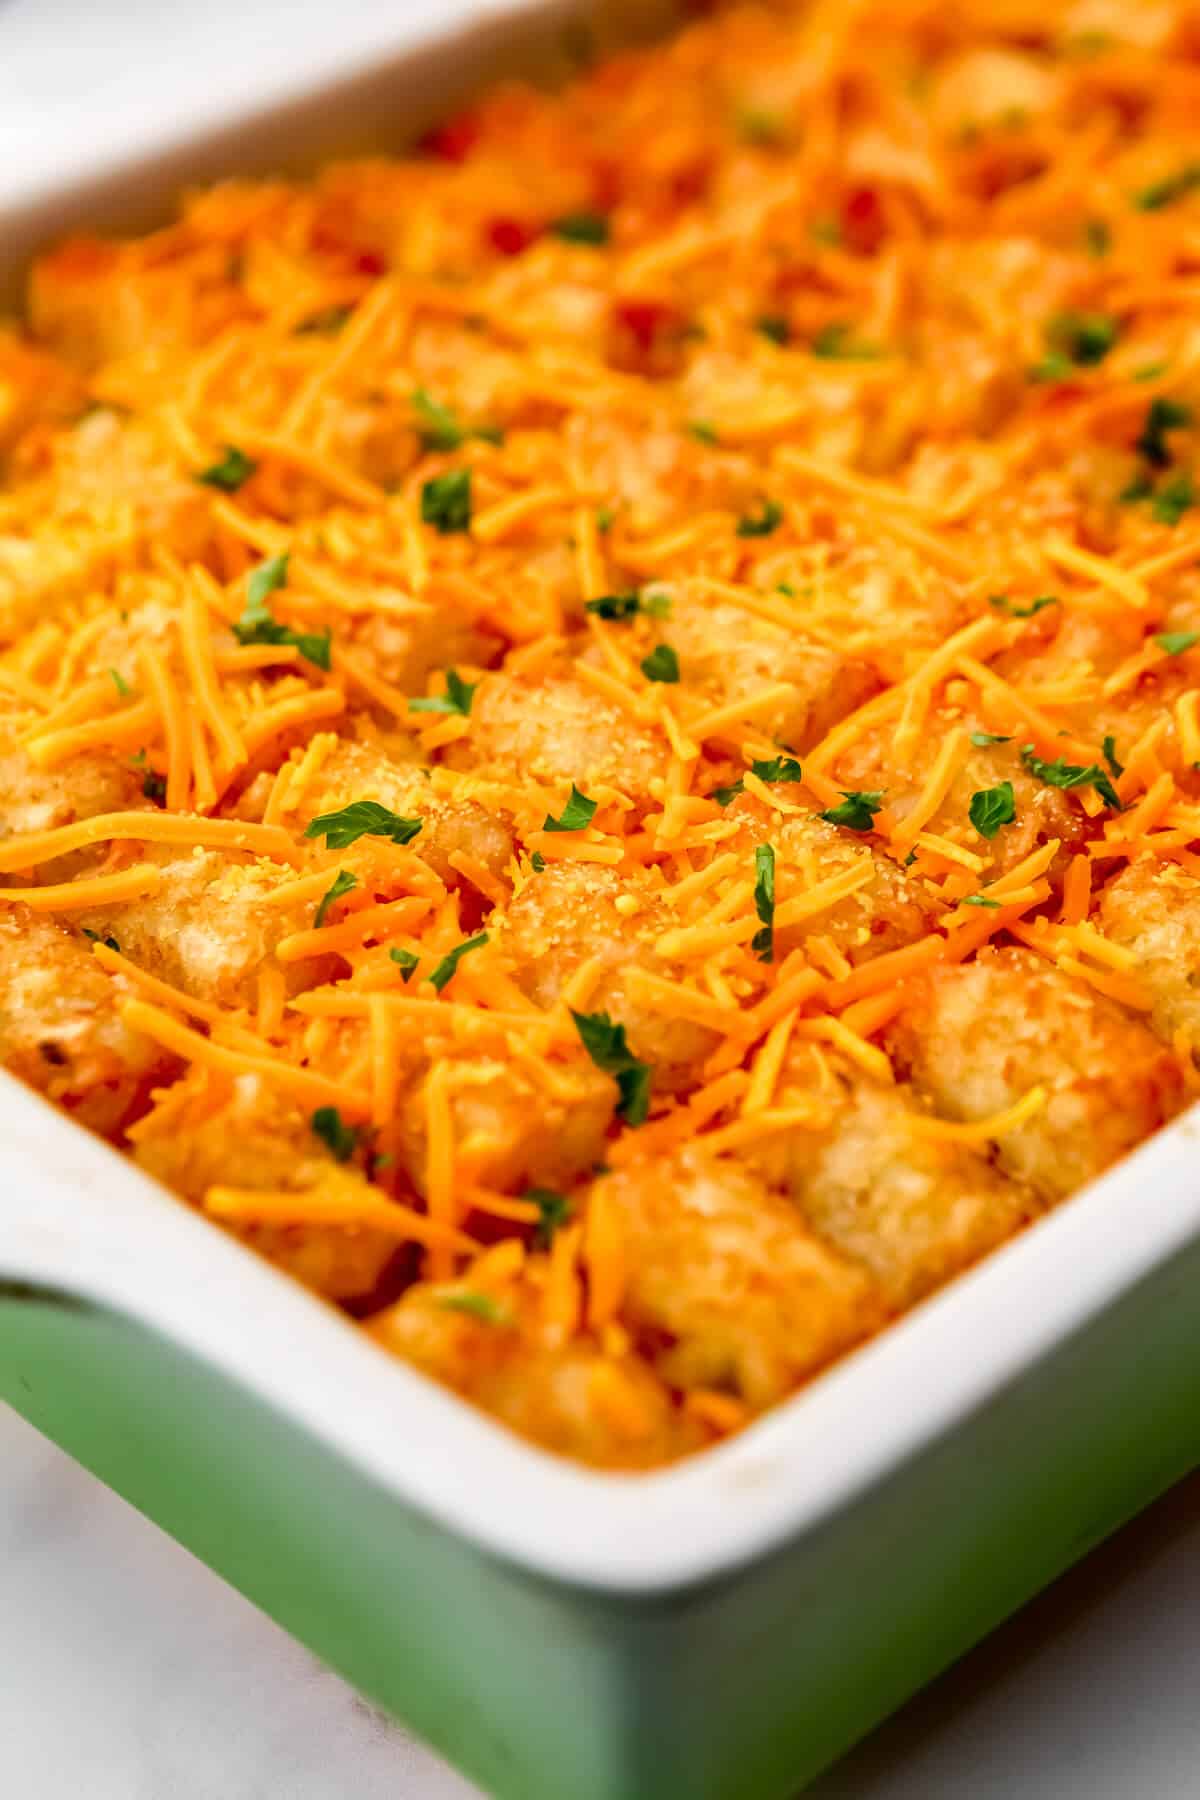 A vegan breakfast casserole topped with tater tots and vegan cheese.